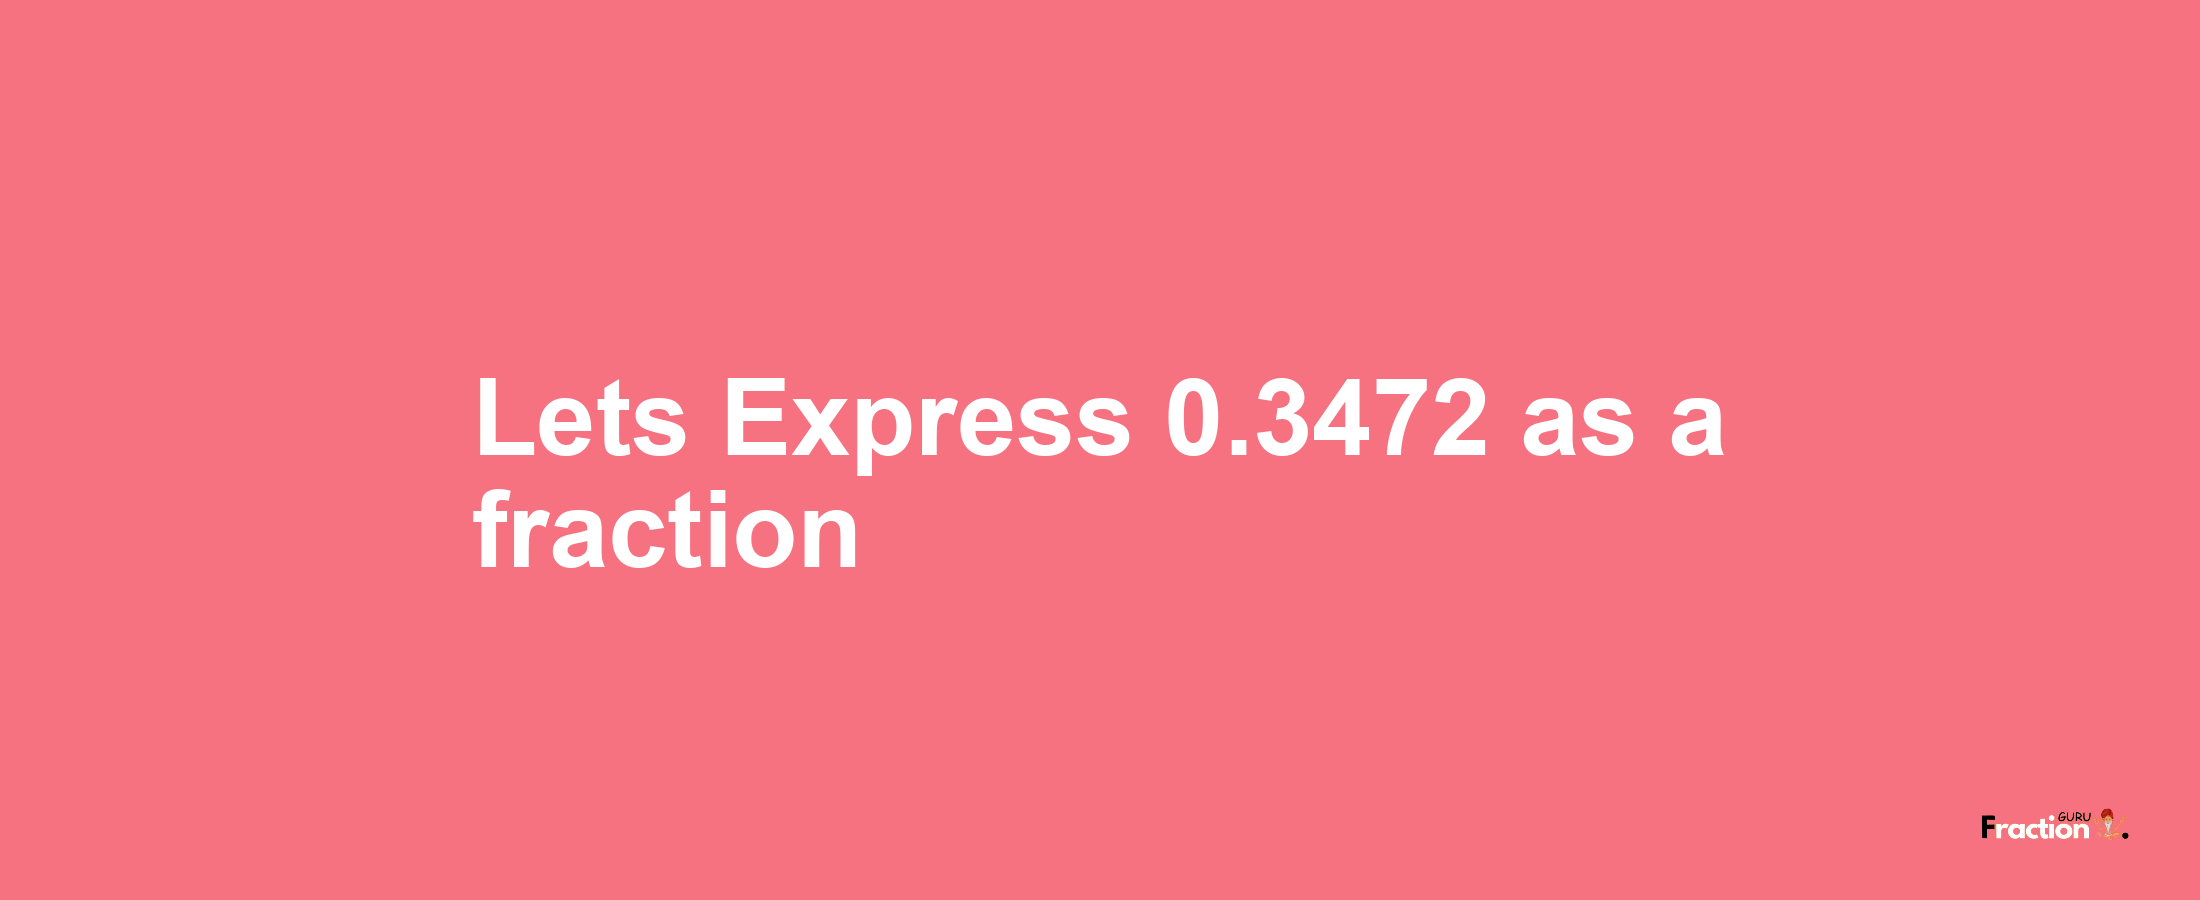 Lets Express 0.3472 as afraction